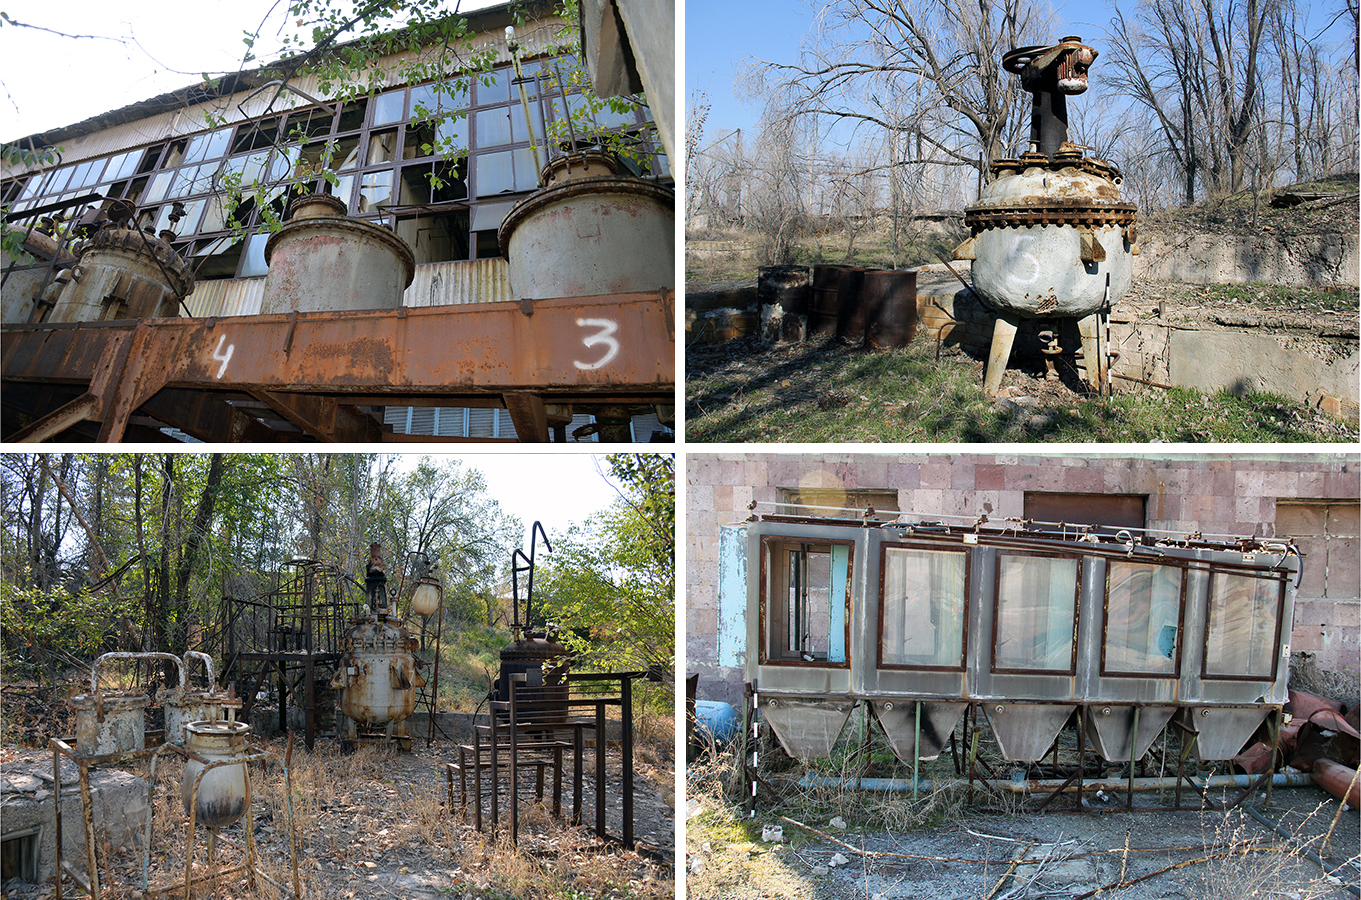 Equipment from Khimzavod moved to exterior spaces. Photos by Lori Khatchadourian.